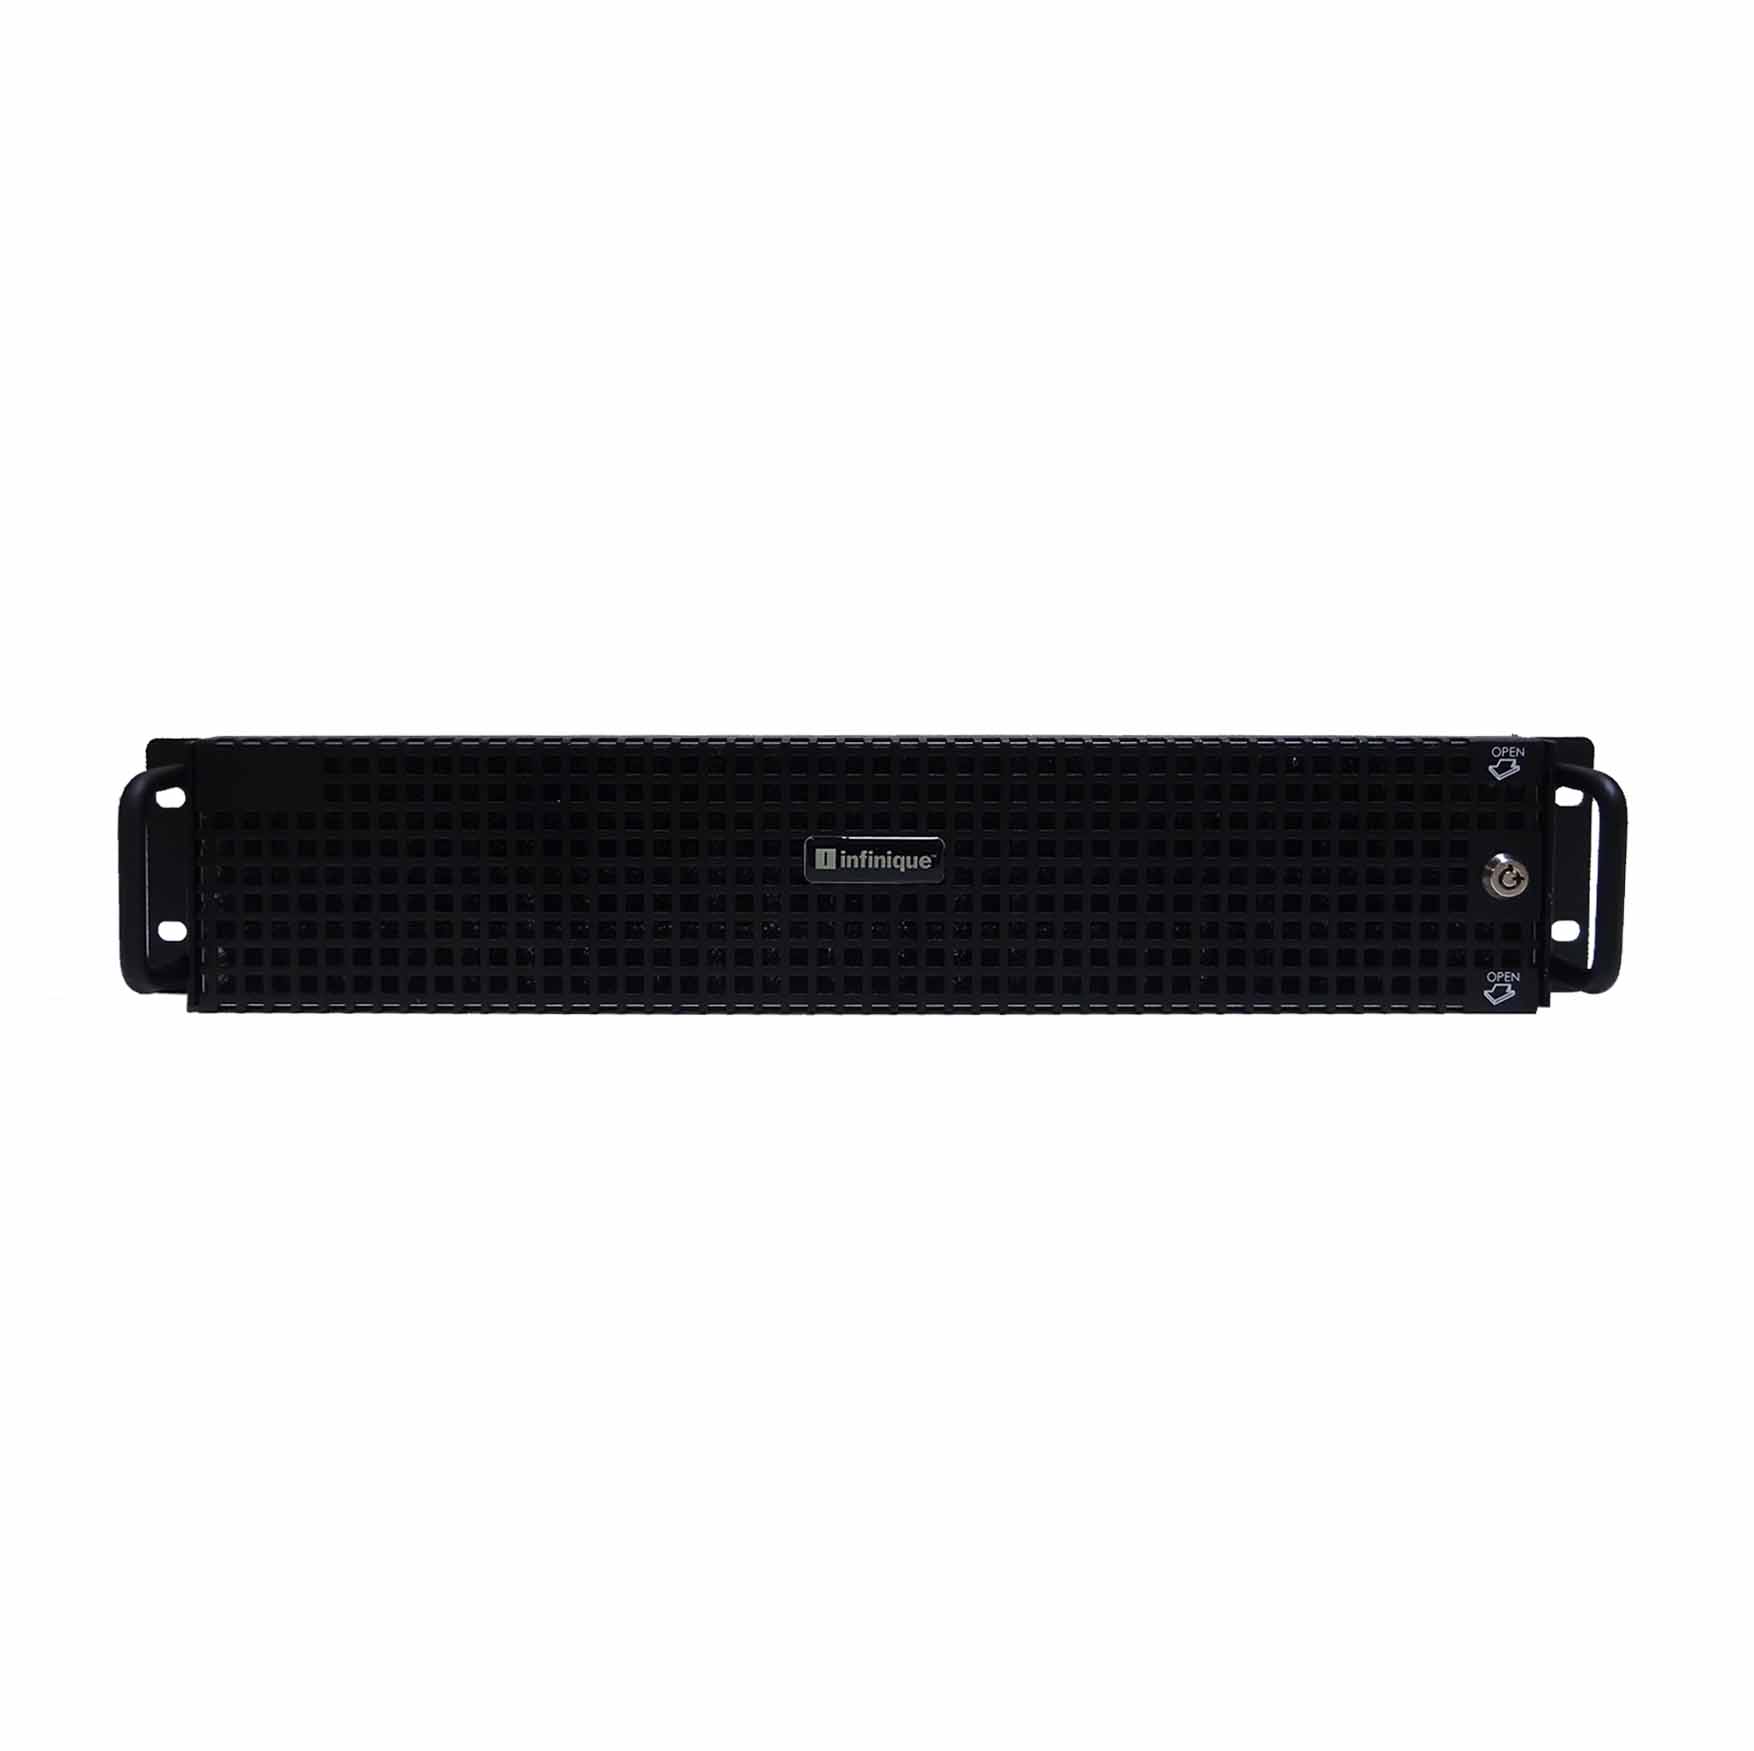 Infinique 16Ch Fortes NVR Professional Series